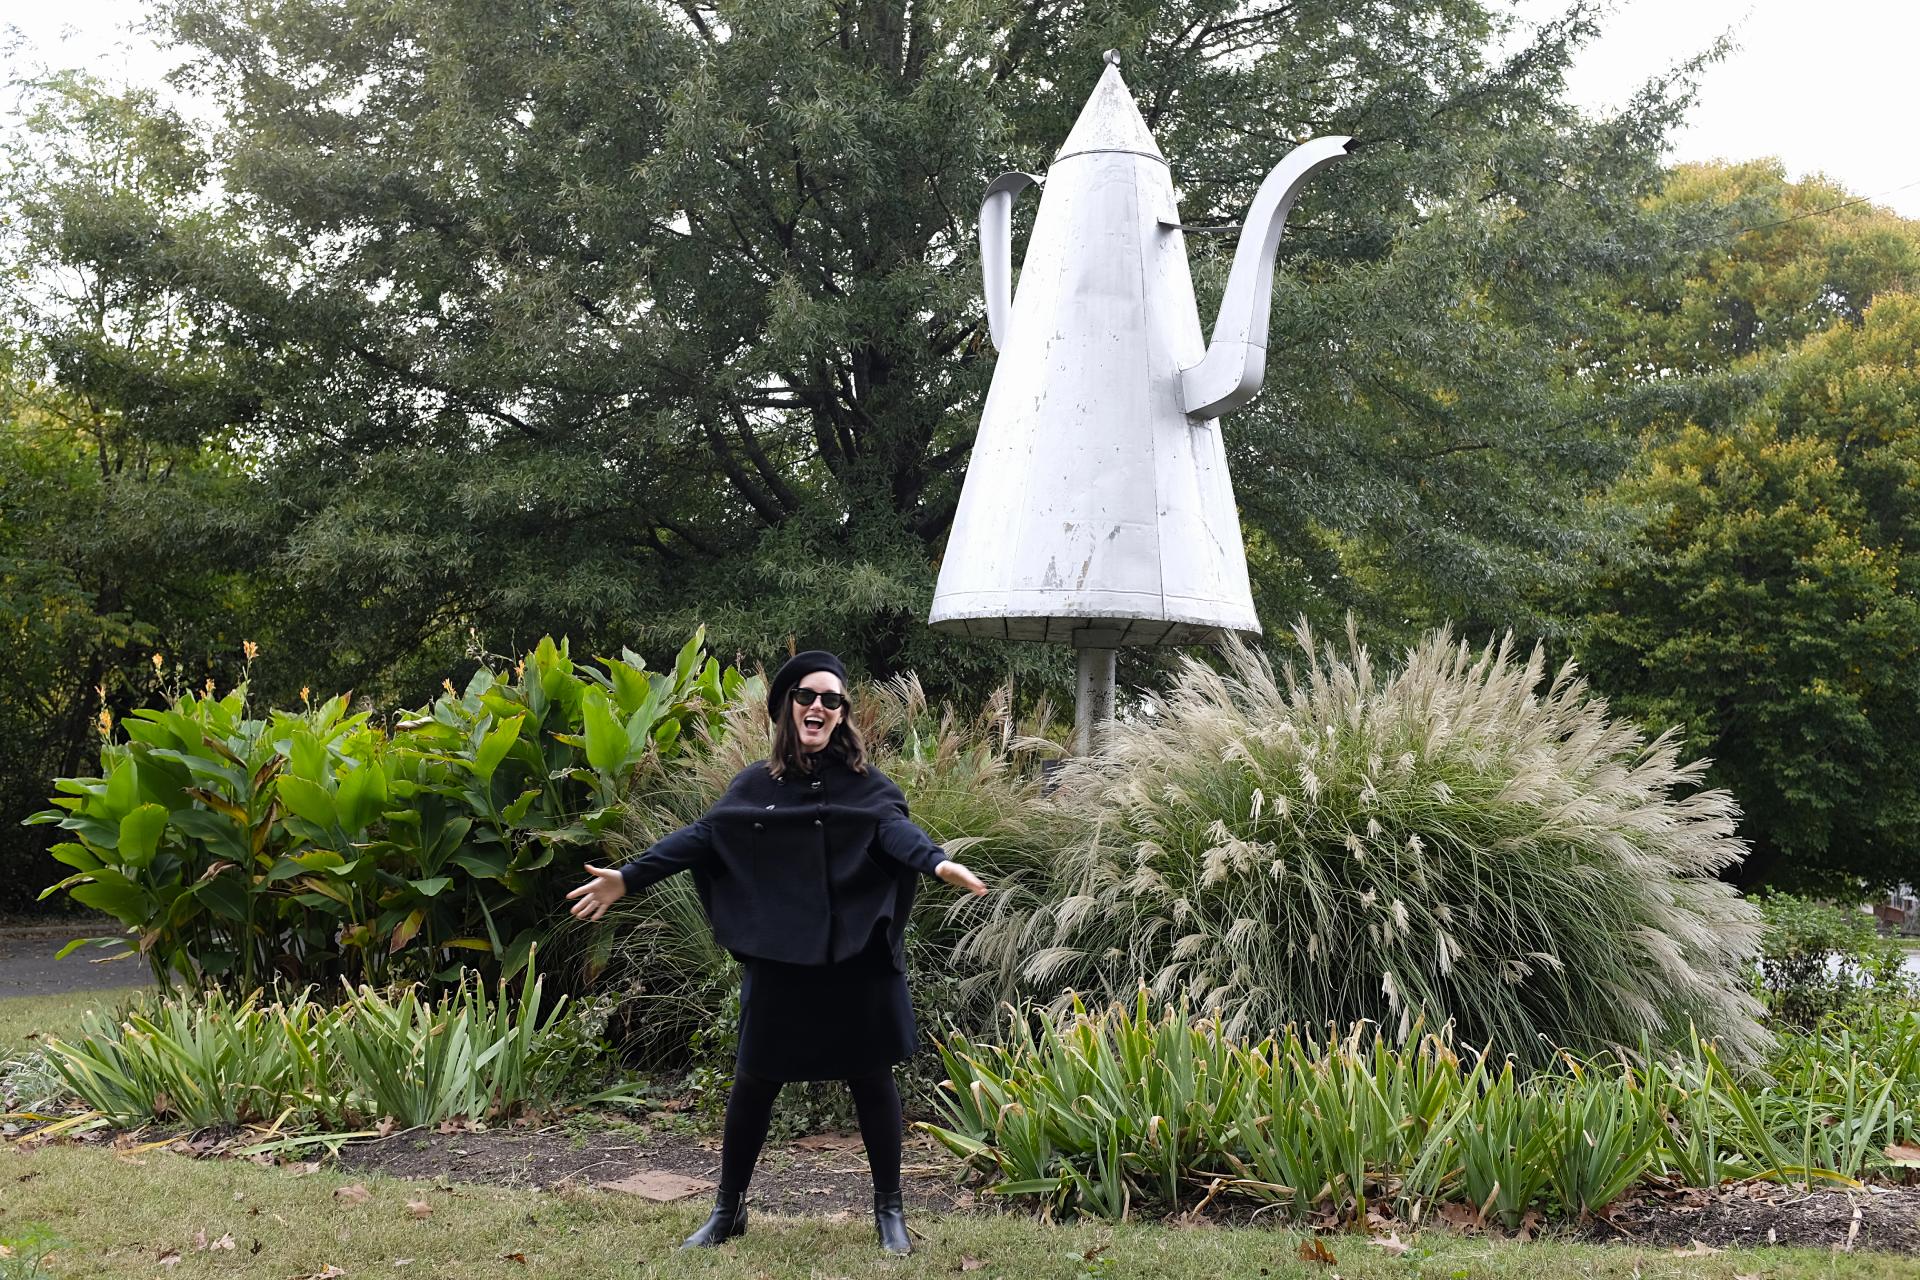 Alyssa stands in front of a large coffee pot sculpture and makes a silly face/gesture